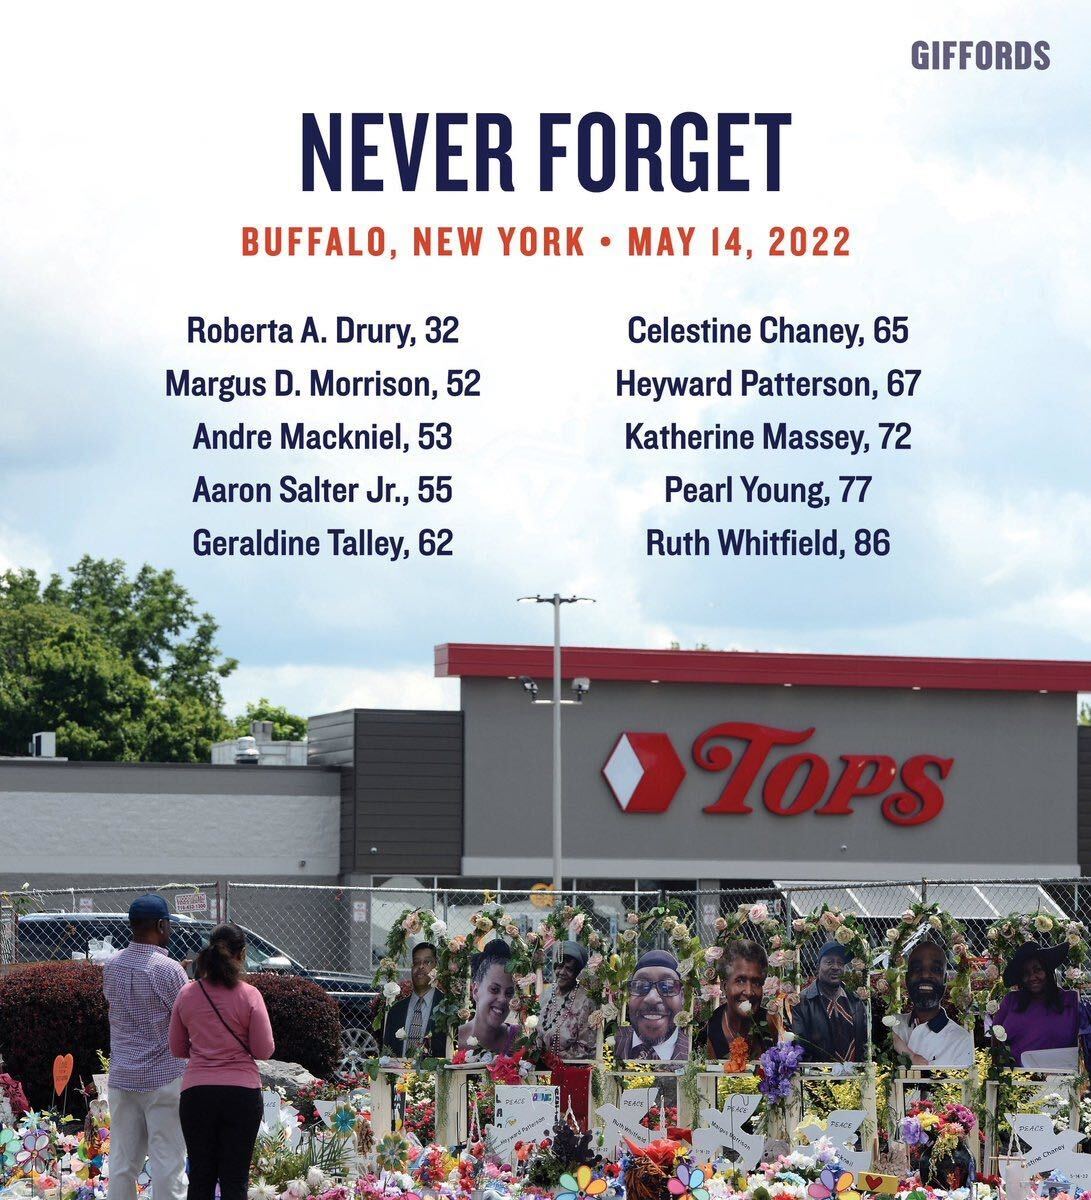 Two years ago, ten people went grocery shopping in Buffalo, NY, and never made it home to their families. They were shot and killed in a racist attack by a gunman who was radicalized online. Three others were shot and injured. We make it far too easy for people fueled by racist…